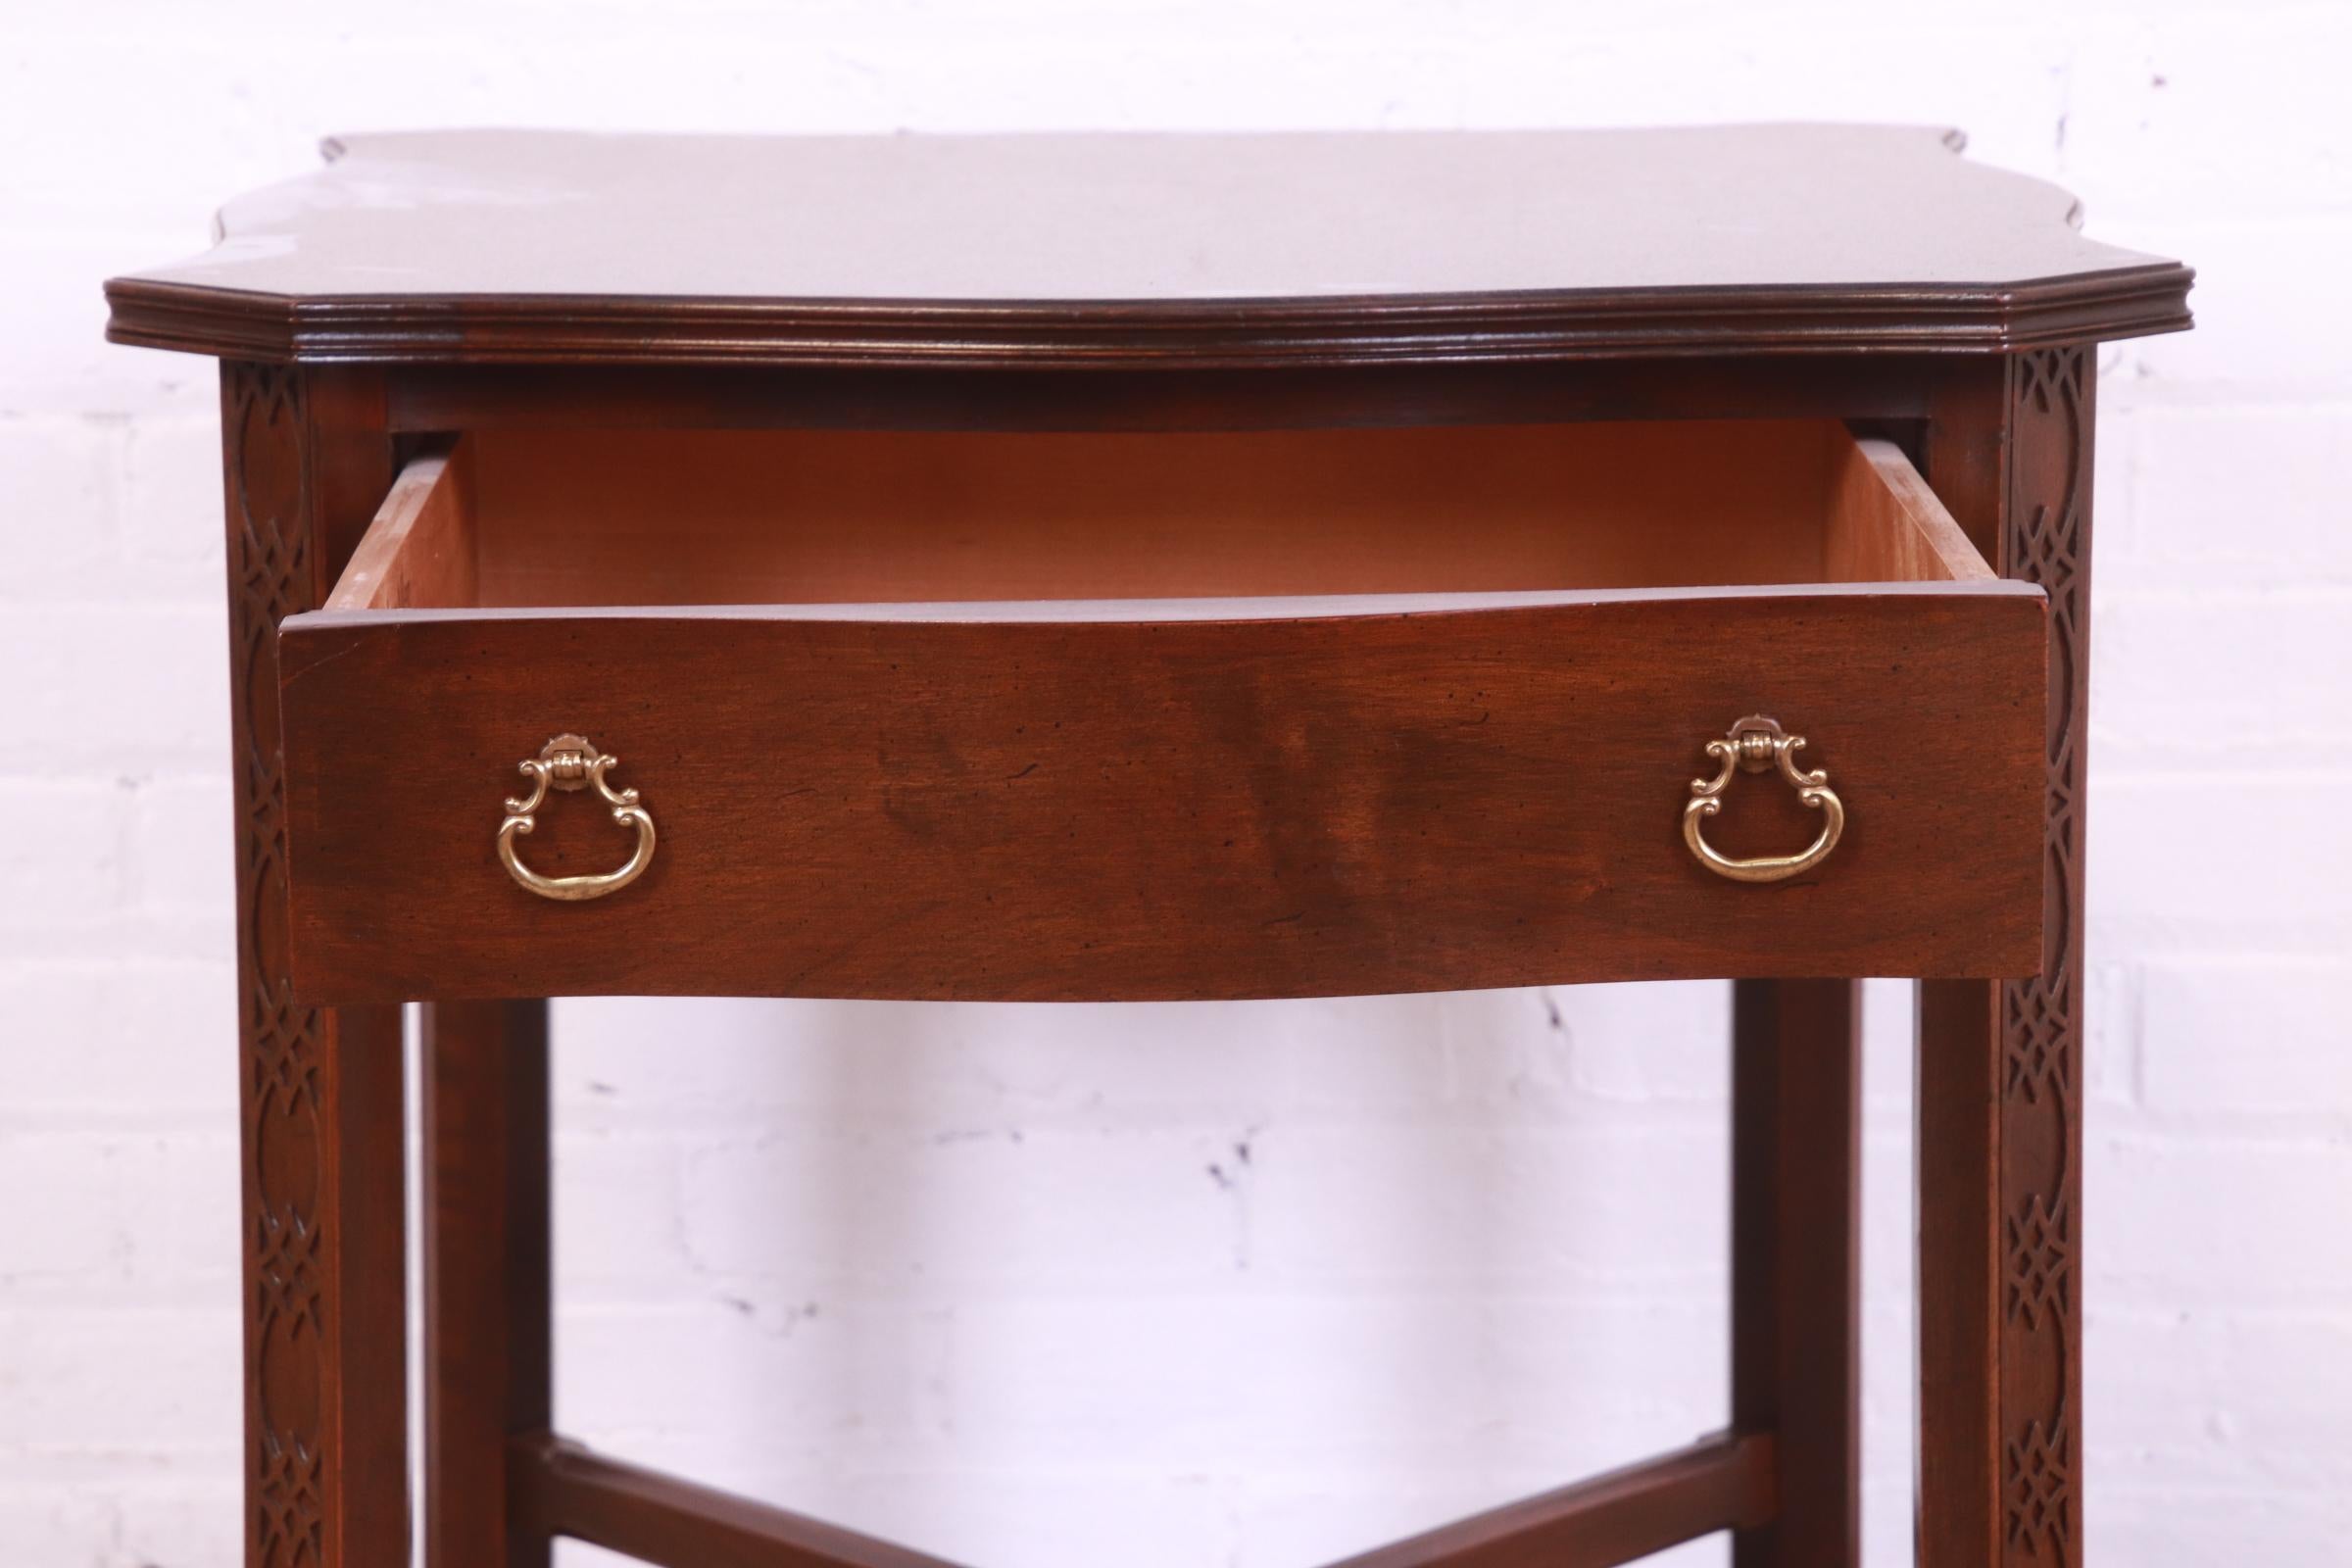 Ethan Allen Georgian Carved Cherry Wood Tea Table or Occasional Side Table 4